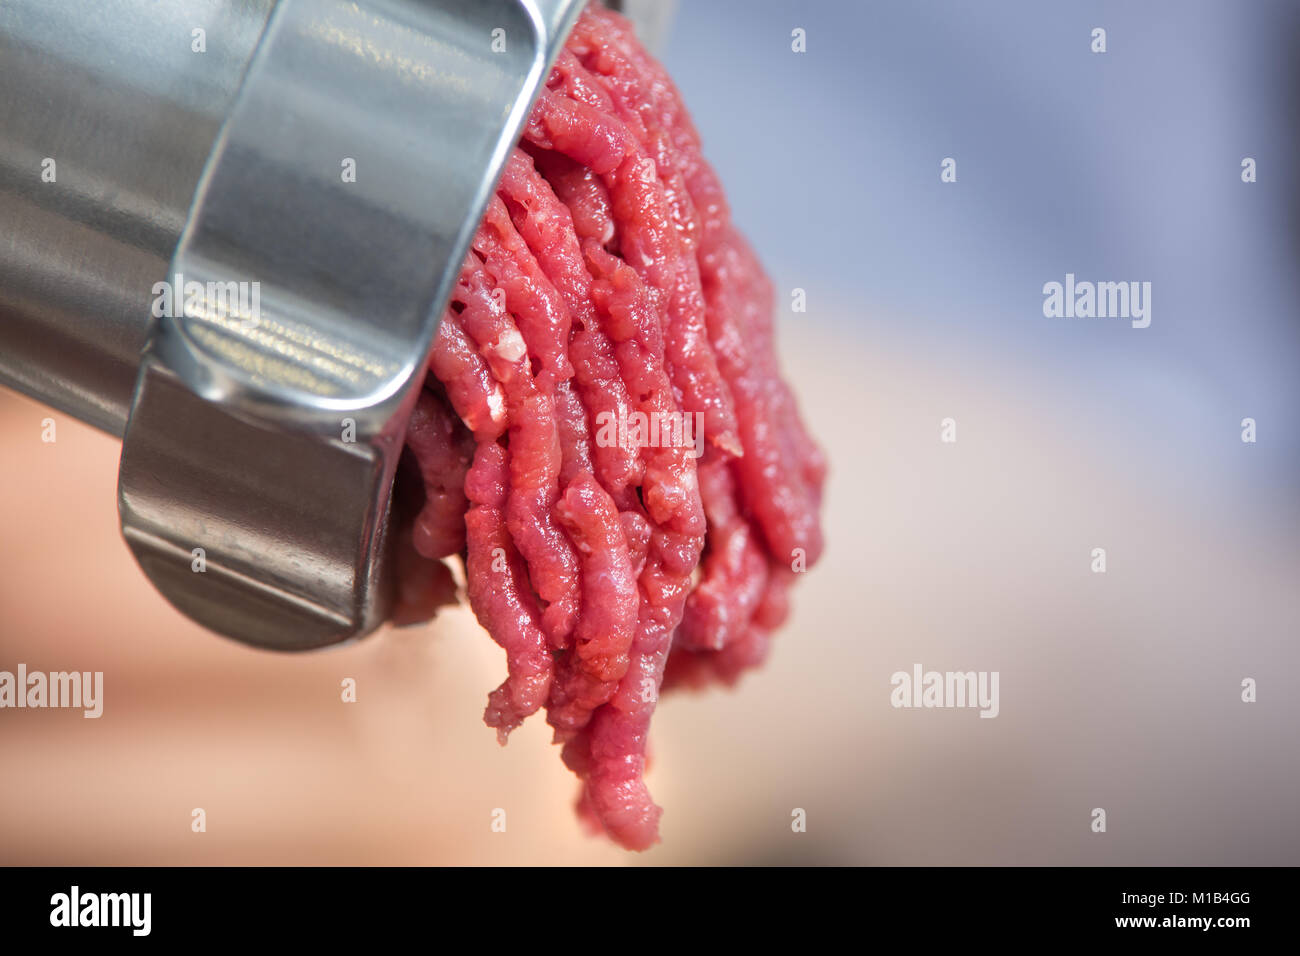 meat and grinder. Minced meat and meat grinder. Meat grinder machine  chopping uncooked ground meat Stock Photo - Alamy